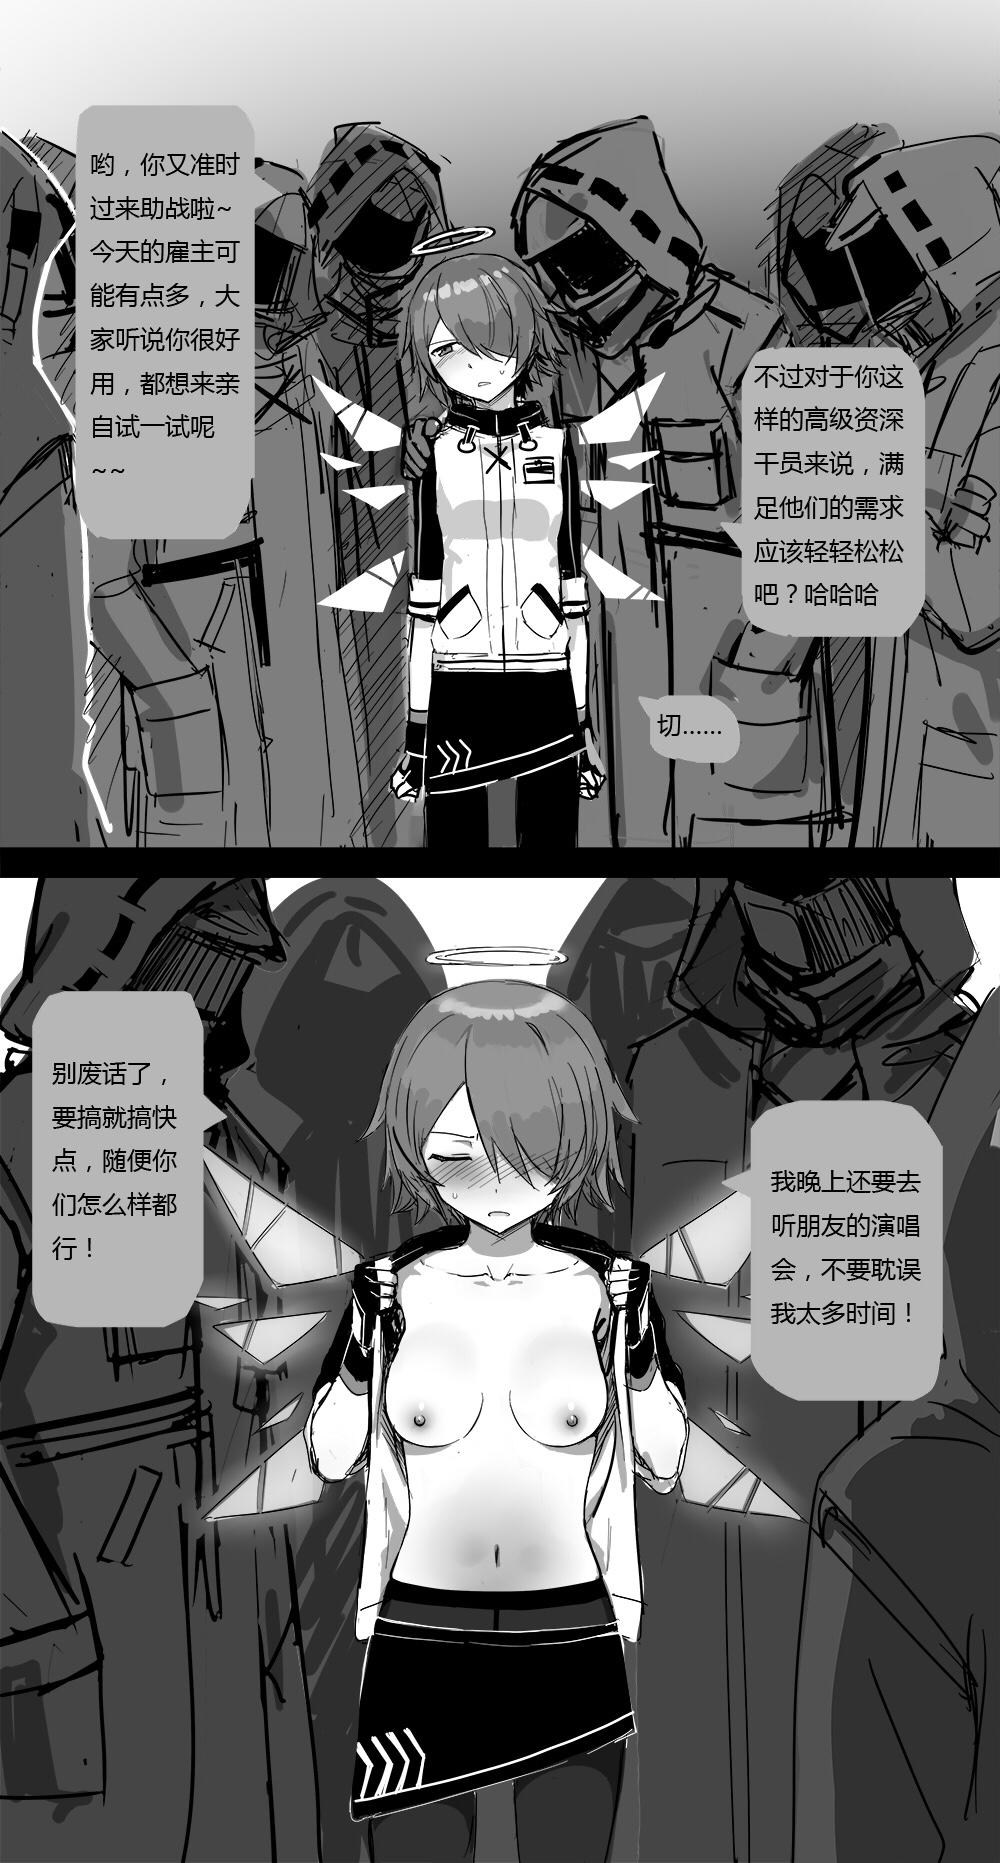 18 Year Old Porn 无能狂怒 - Arknights Eating - Page 6